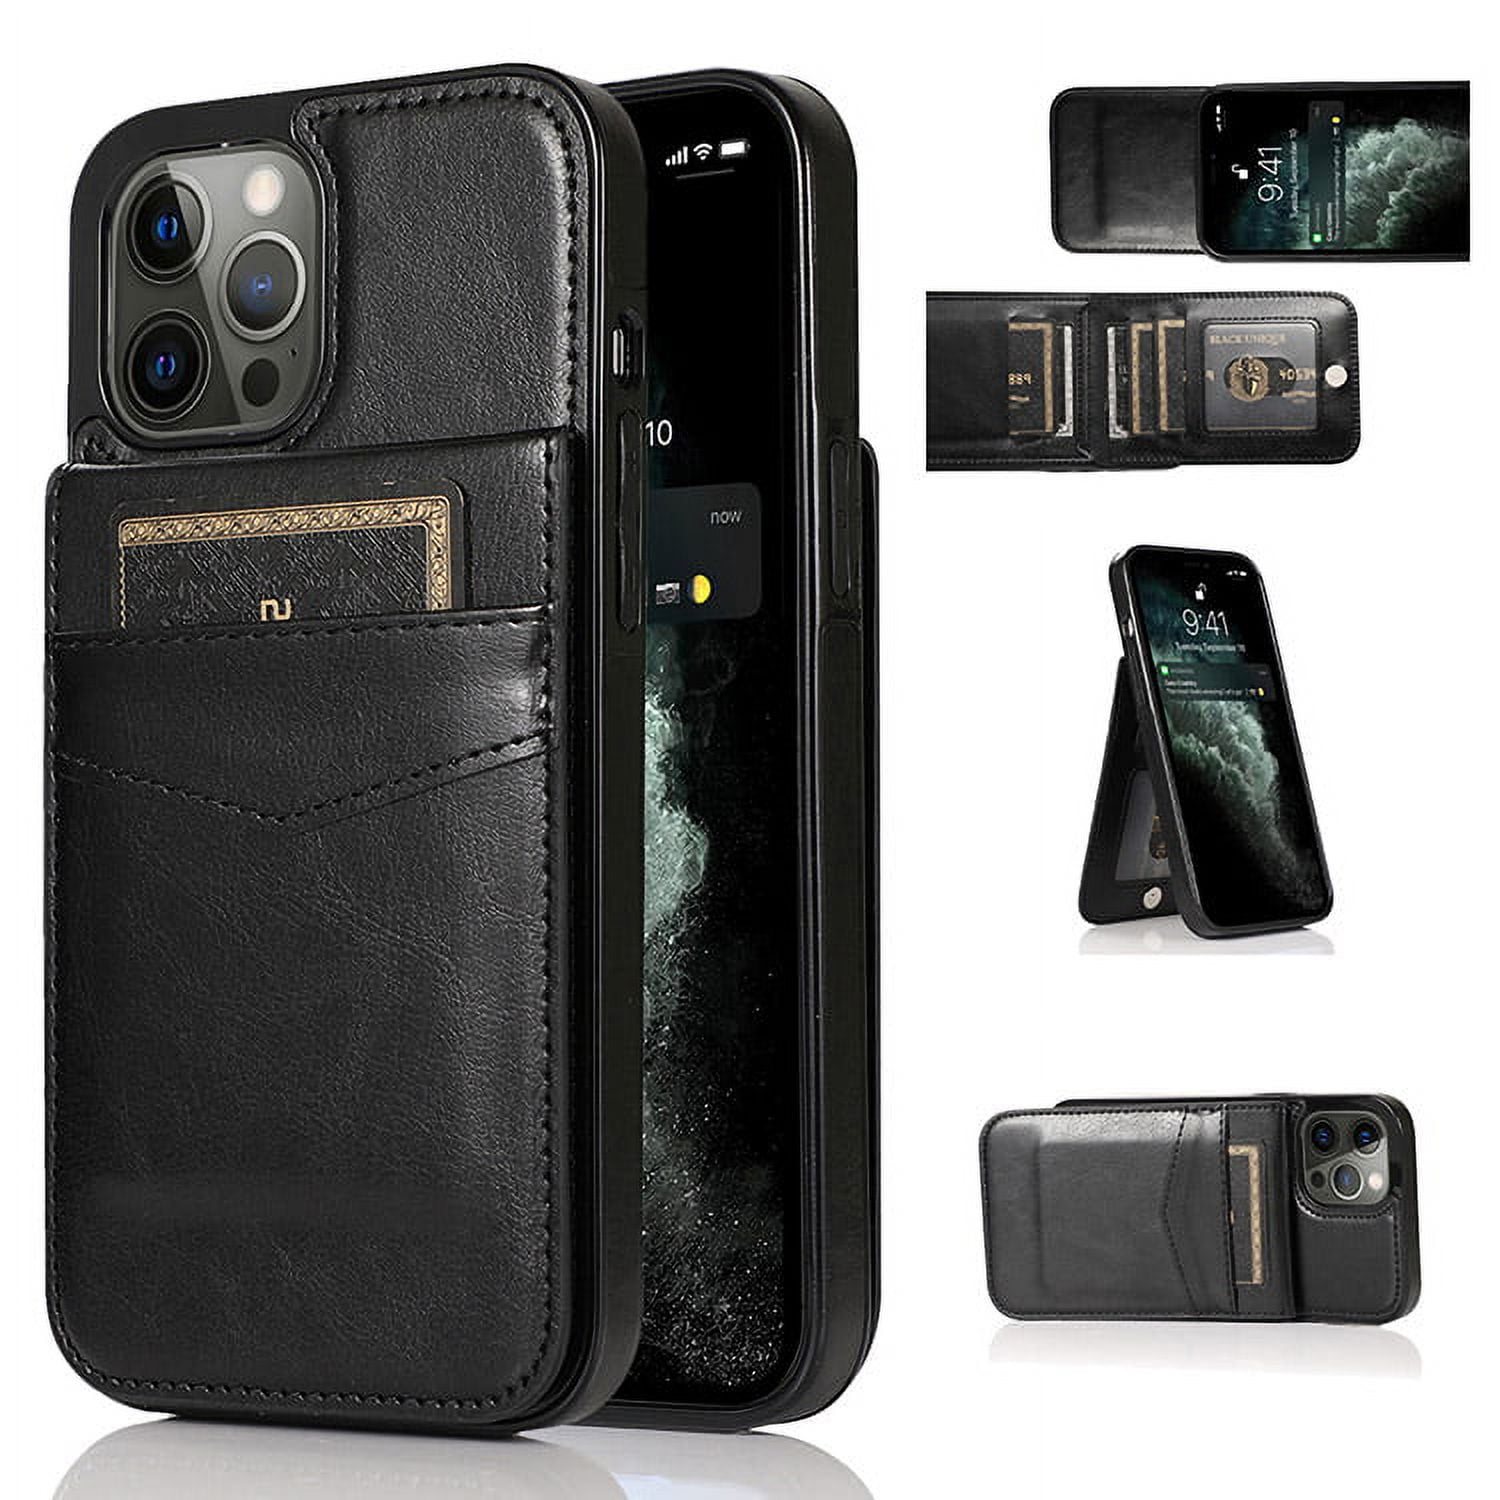 iPhone 13 wallet case men Leather King Phone Case for iPhone 13 Pro Max  Mini 12 Pro 11 Pro Max XS MAX XR X 7 8 Plus 6 6s Plus 5 5s Se with Card  Holder